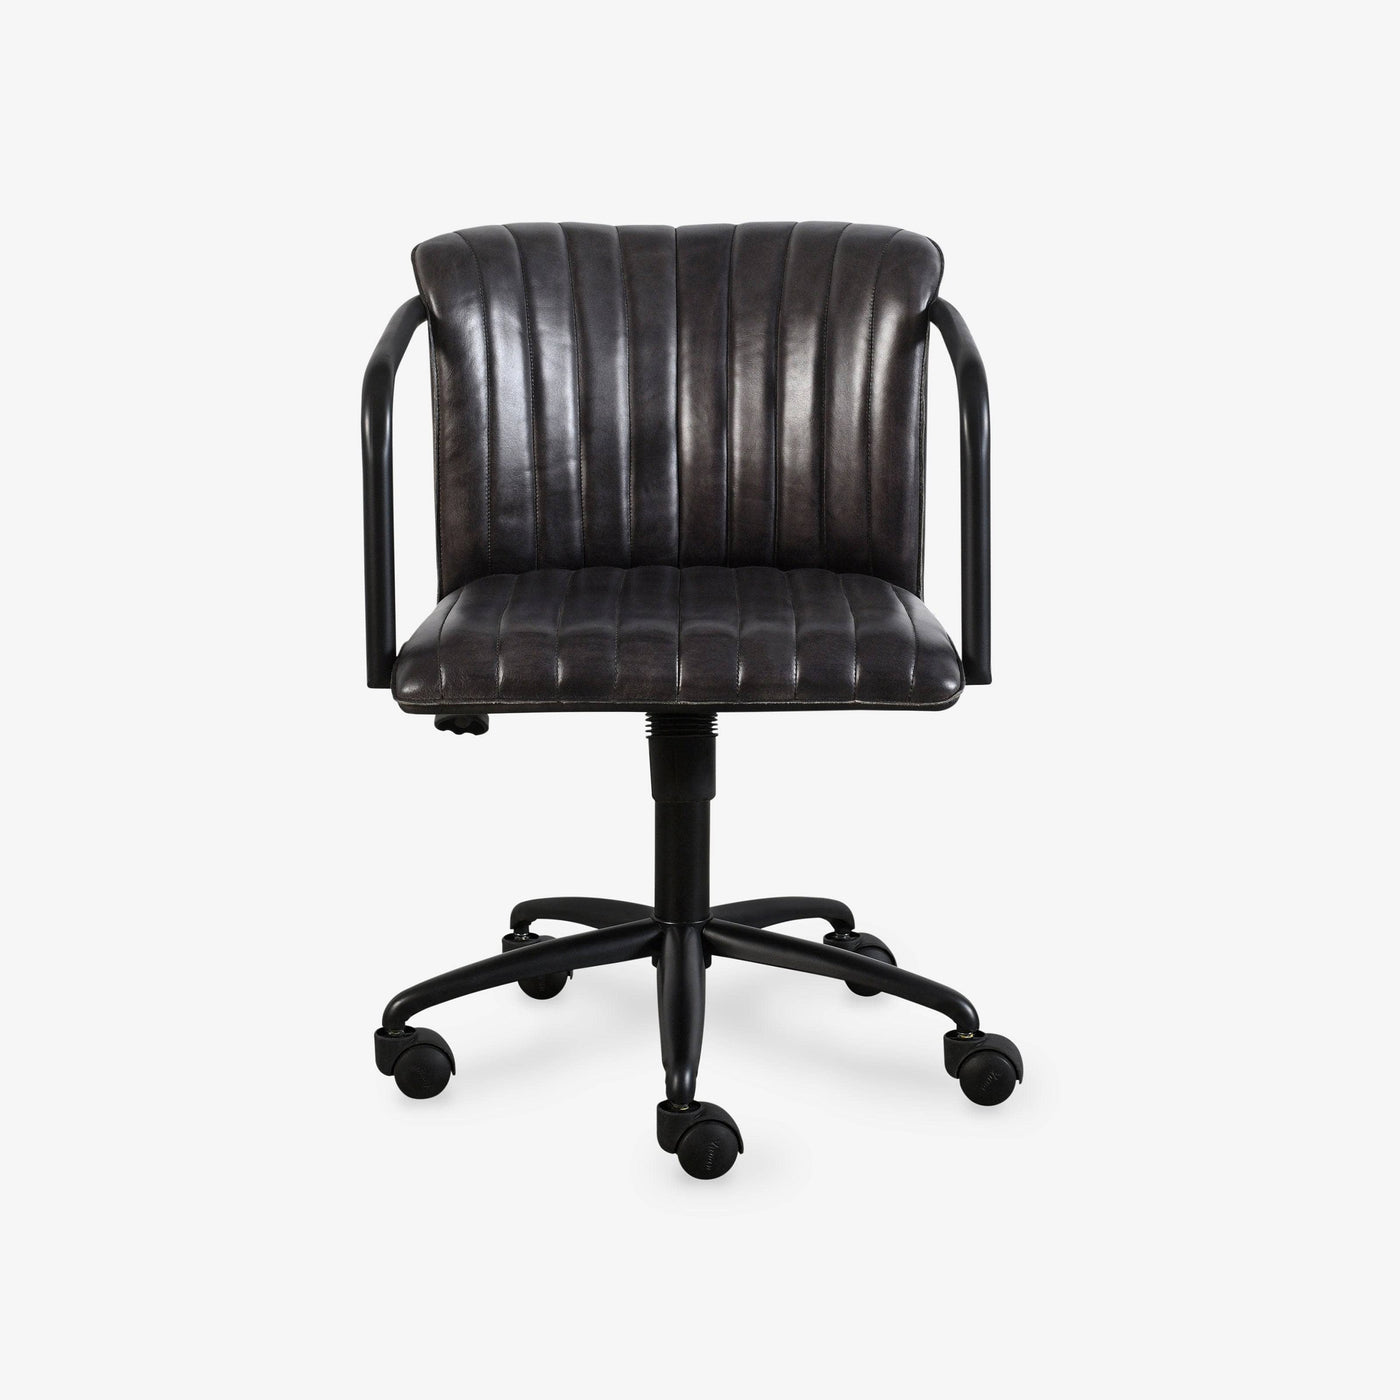 Iron Leather Office Chair, Black, 52x61x84 cm - 1